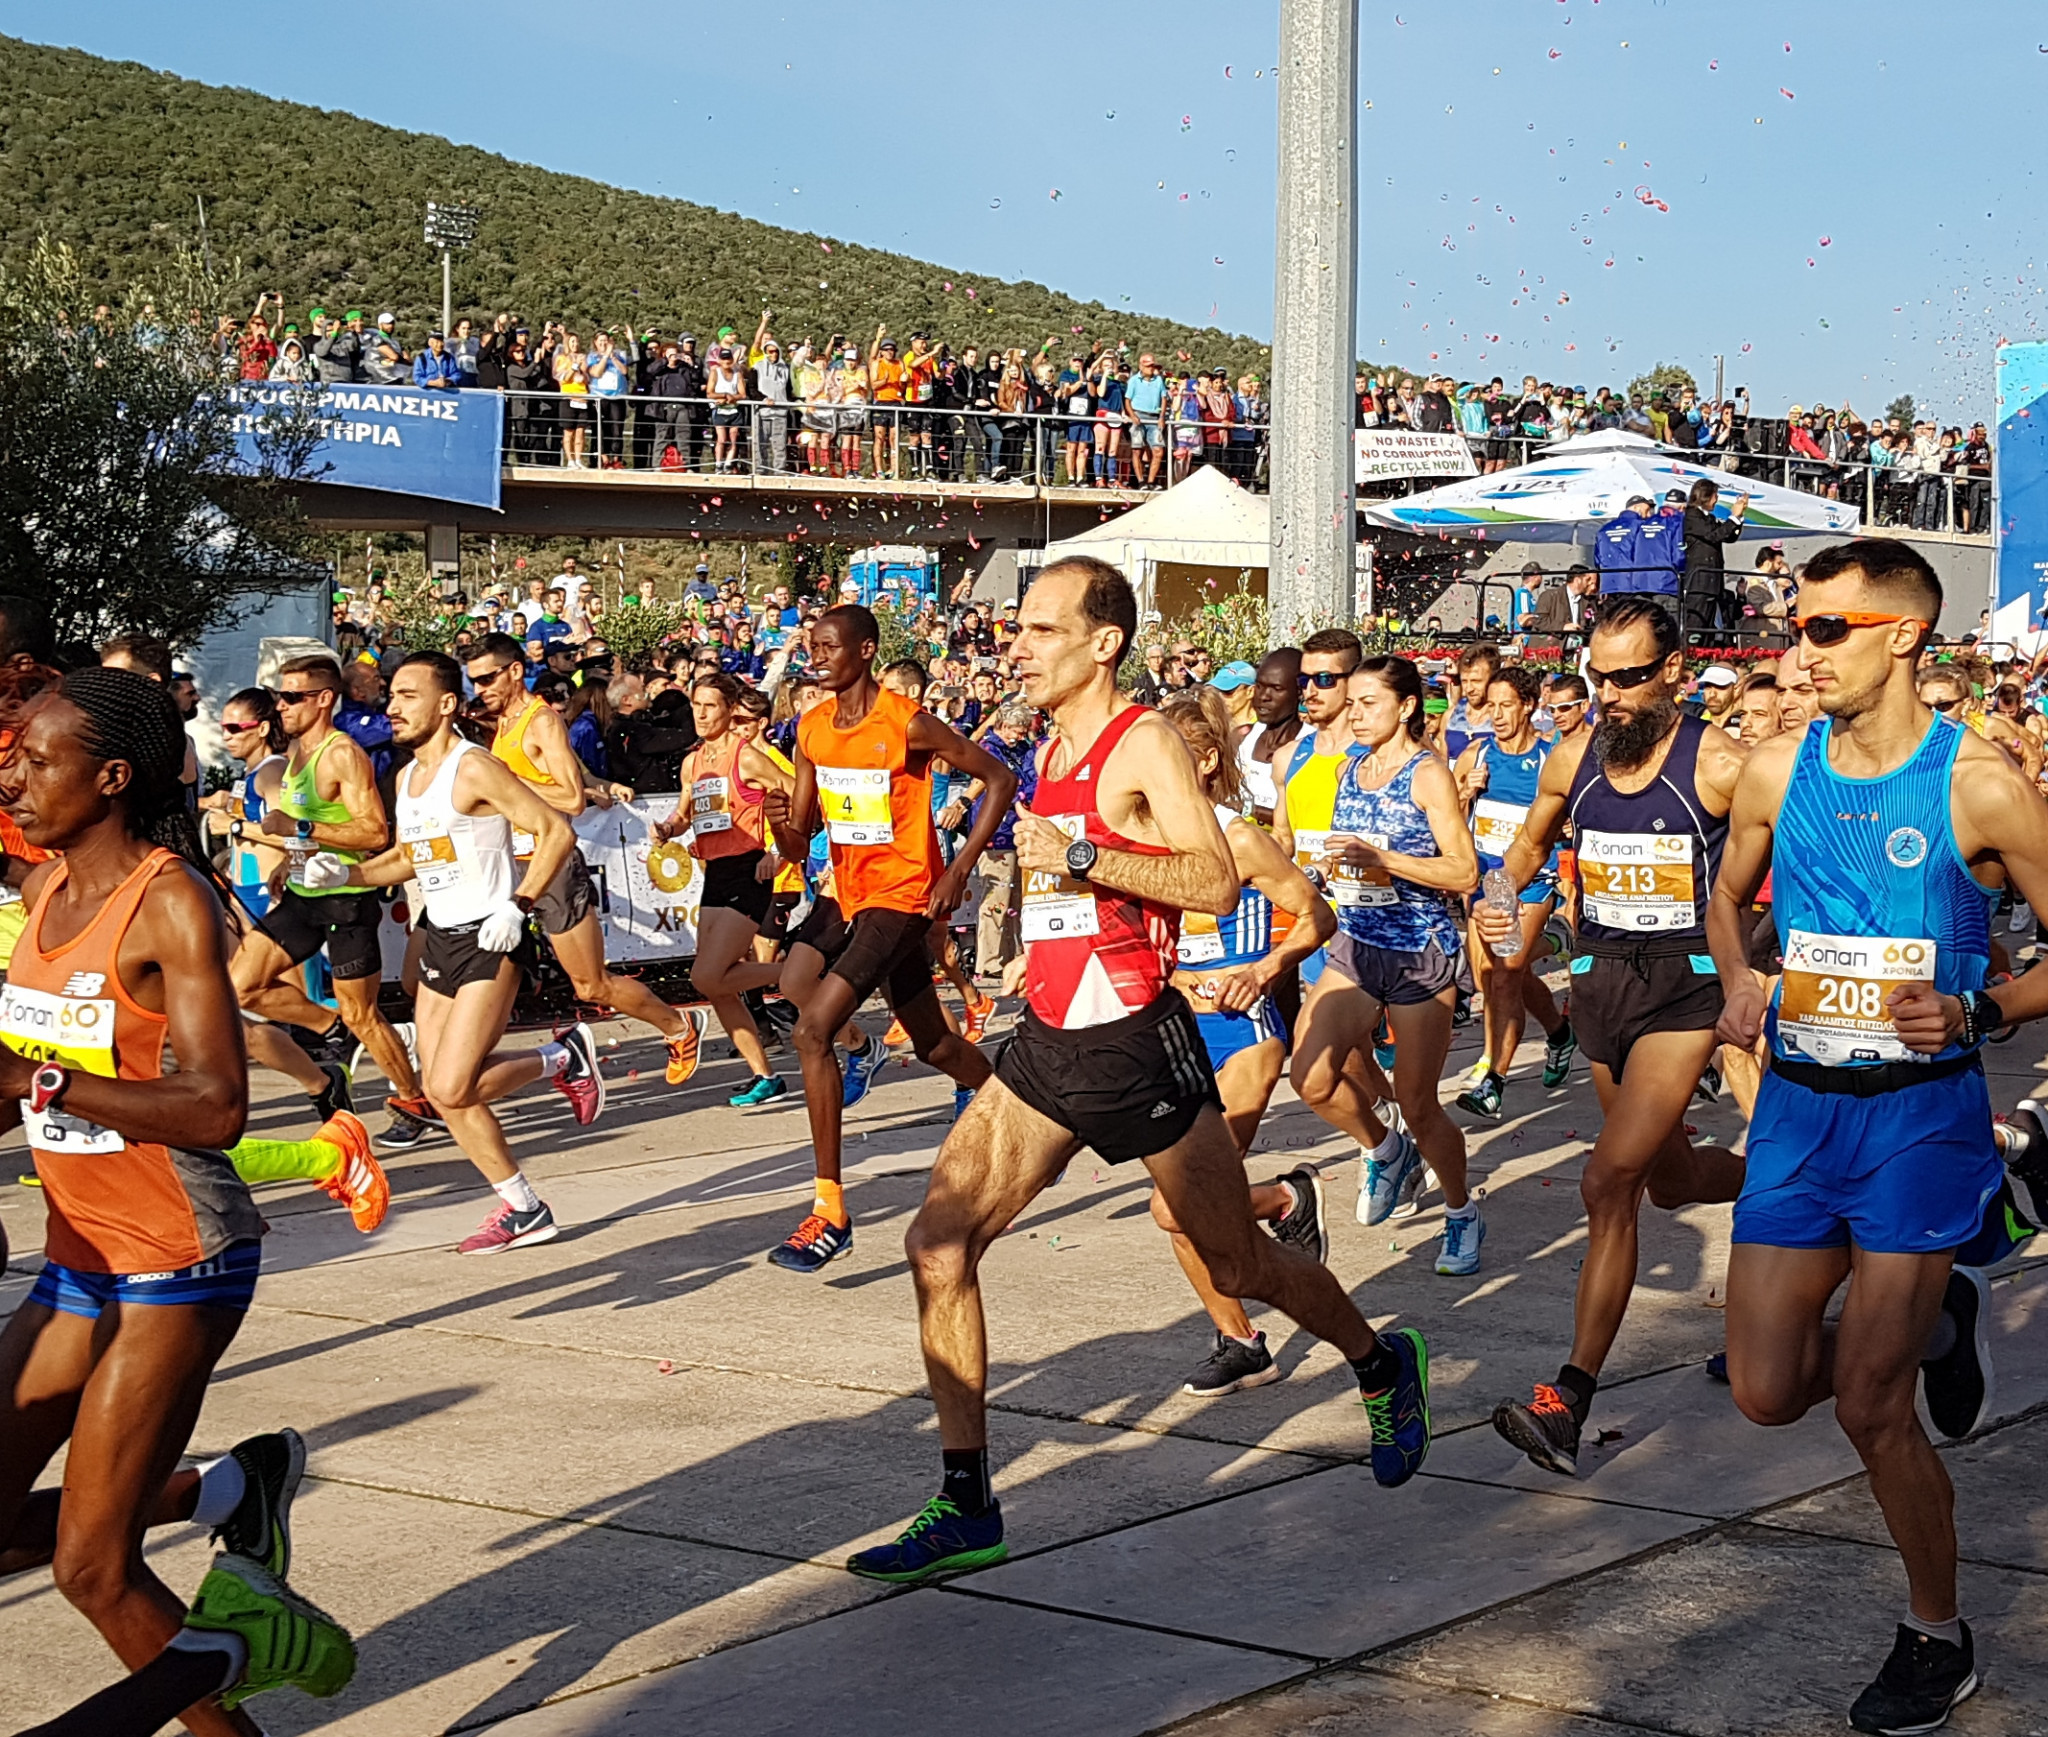 Runners depart Marathon en route for Athens in Sunday's race ©ITG